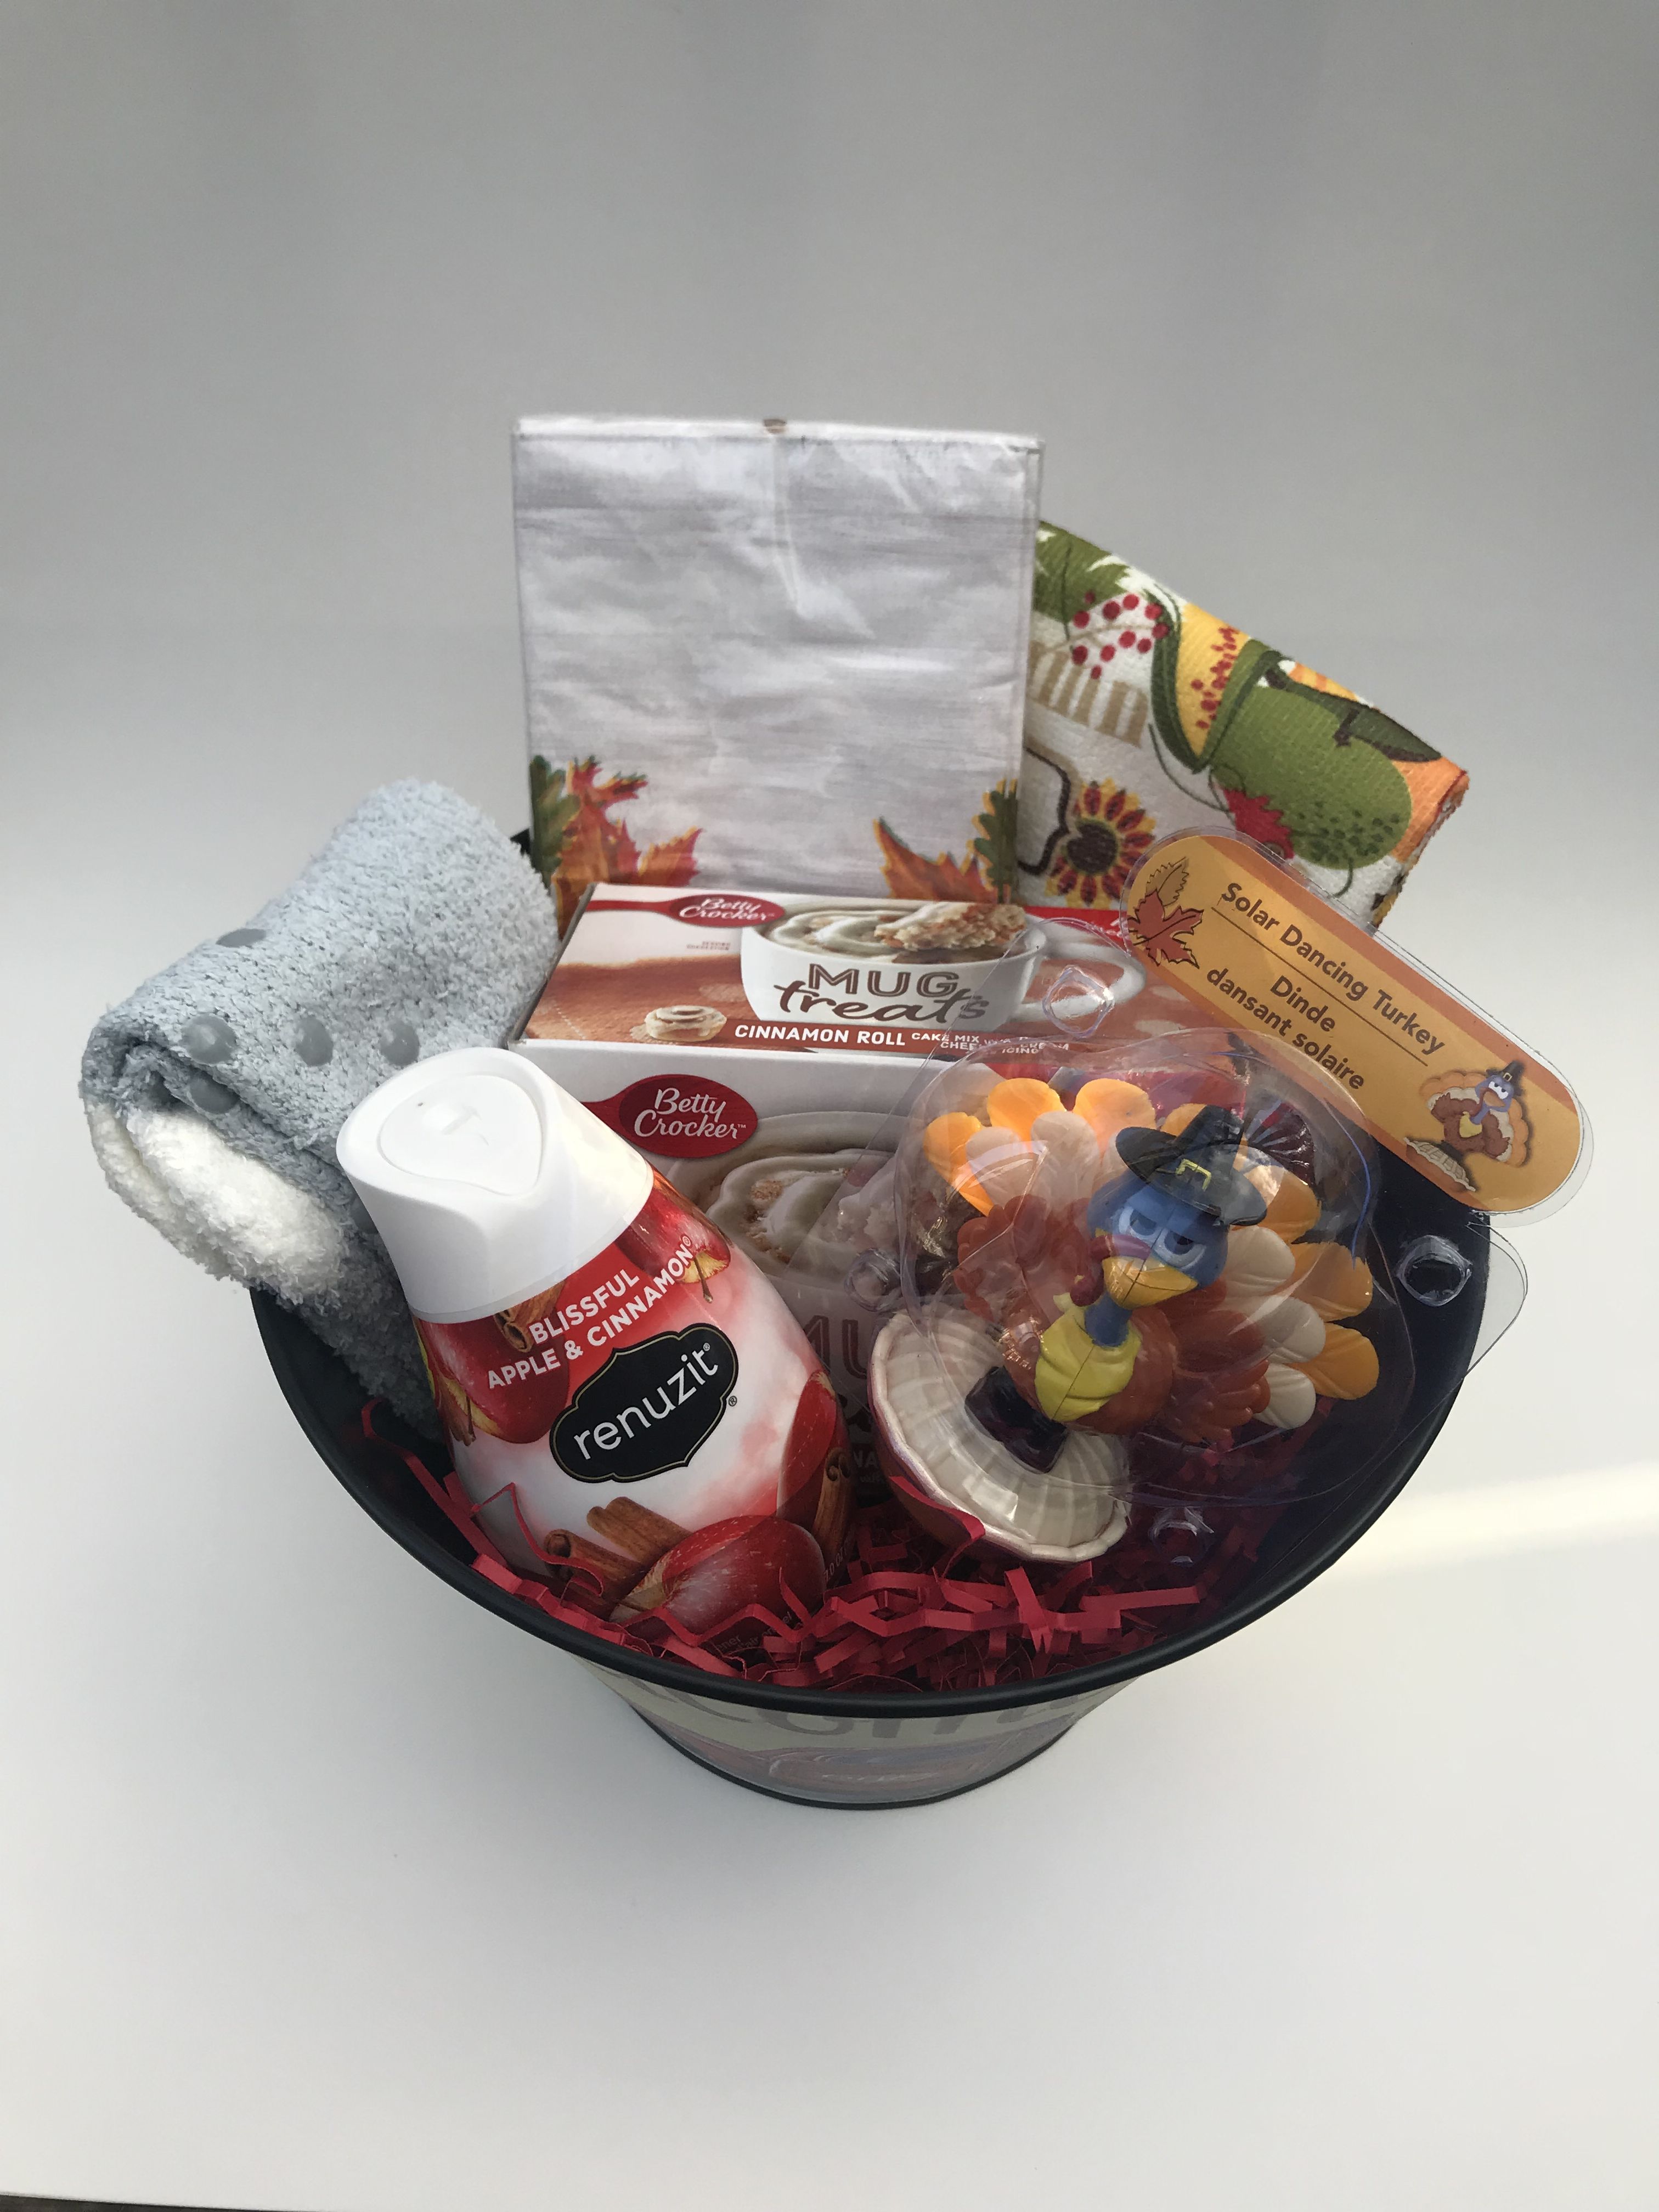 Fall Gift Basket for Senior Citizens | Fall gifts, Fall gift baskets, Gifts